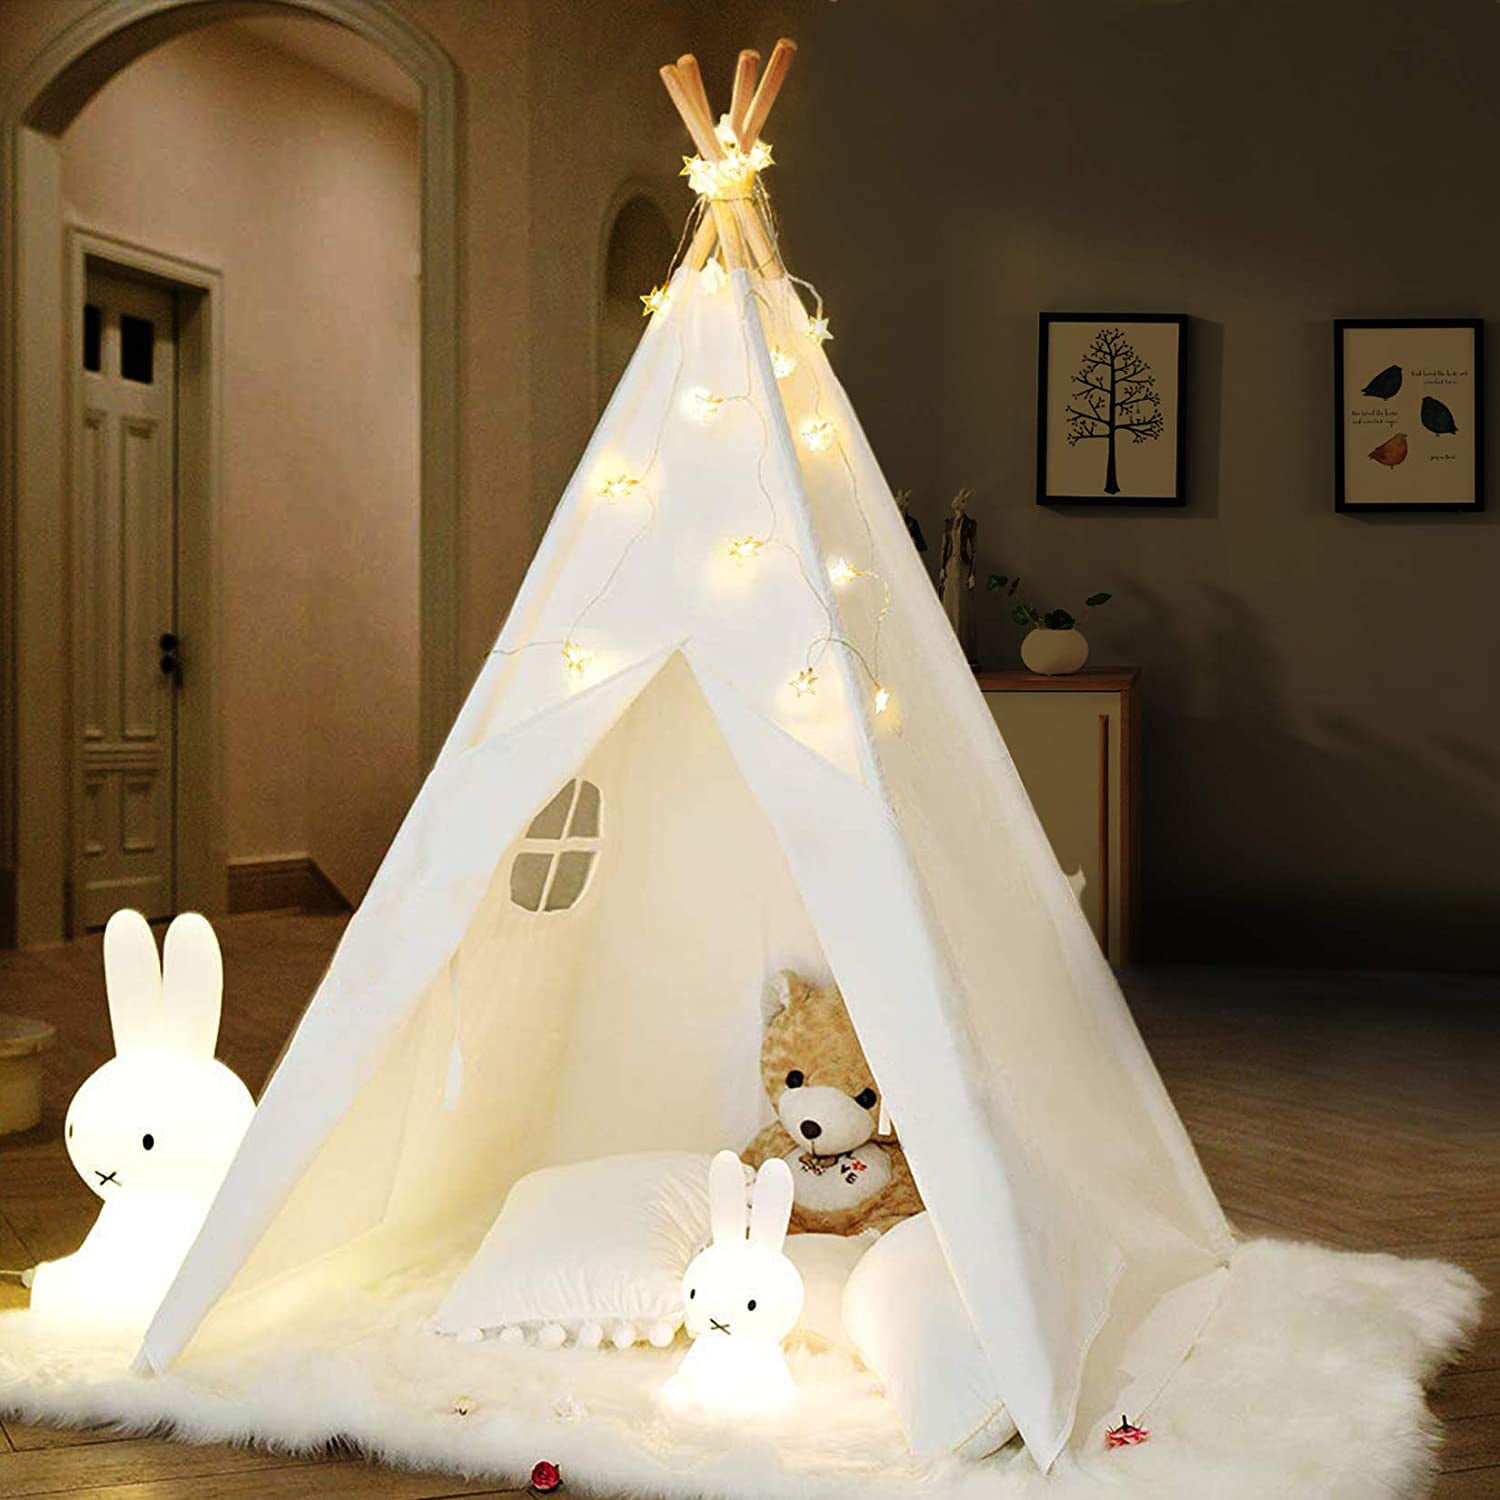 Foldable Kids Teepee Tent Children Play Tent Playhouse Toy Carry Case /Floor Mat 